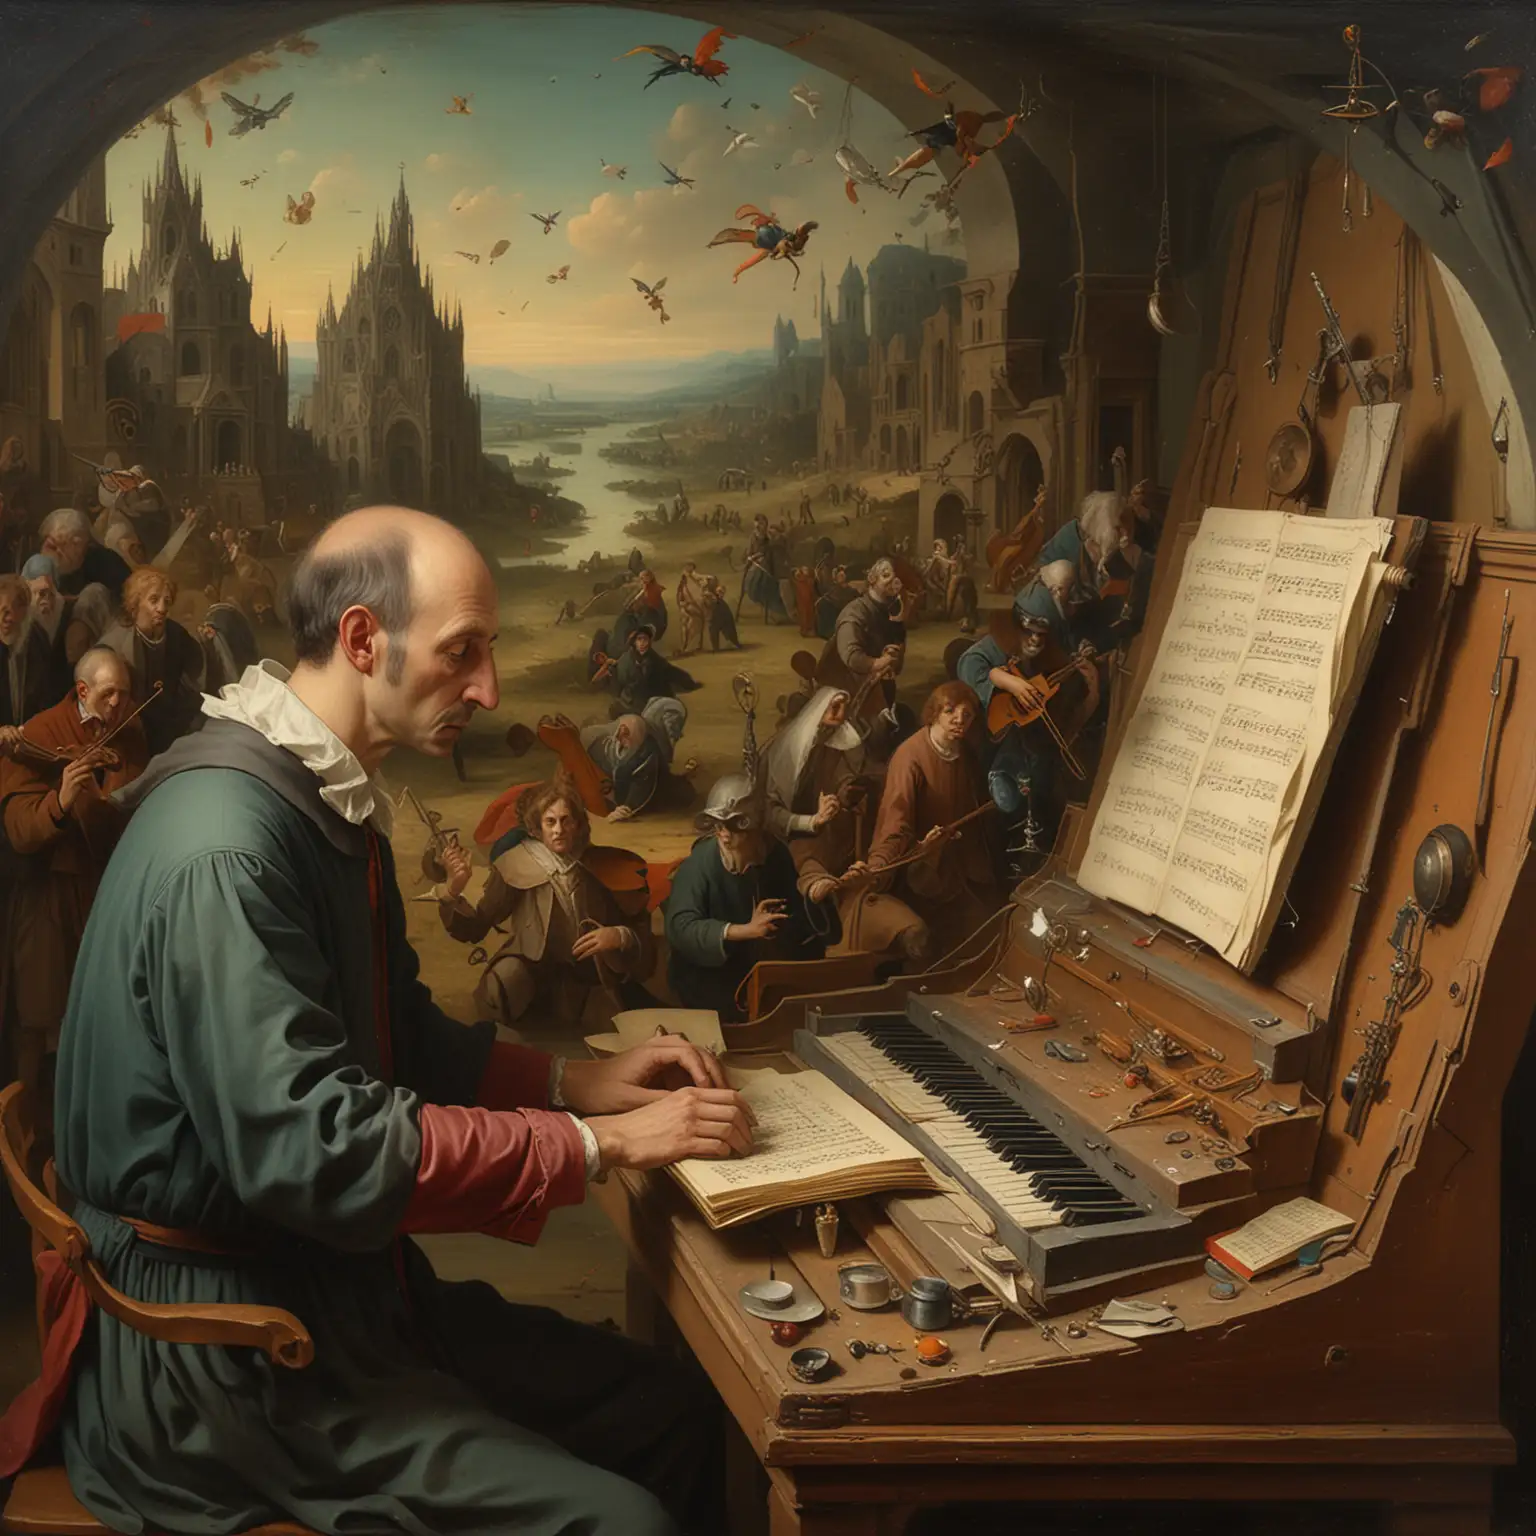 Composer Crafting Apocalyptic Hymn in BoschStyle Painting